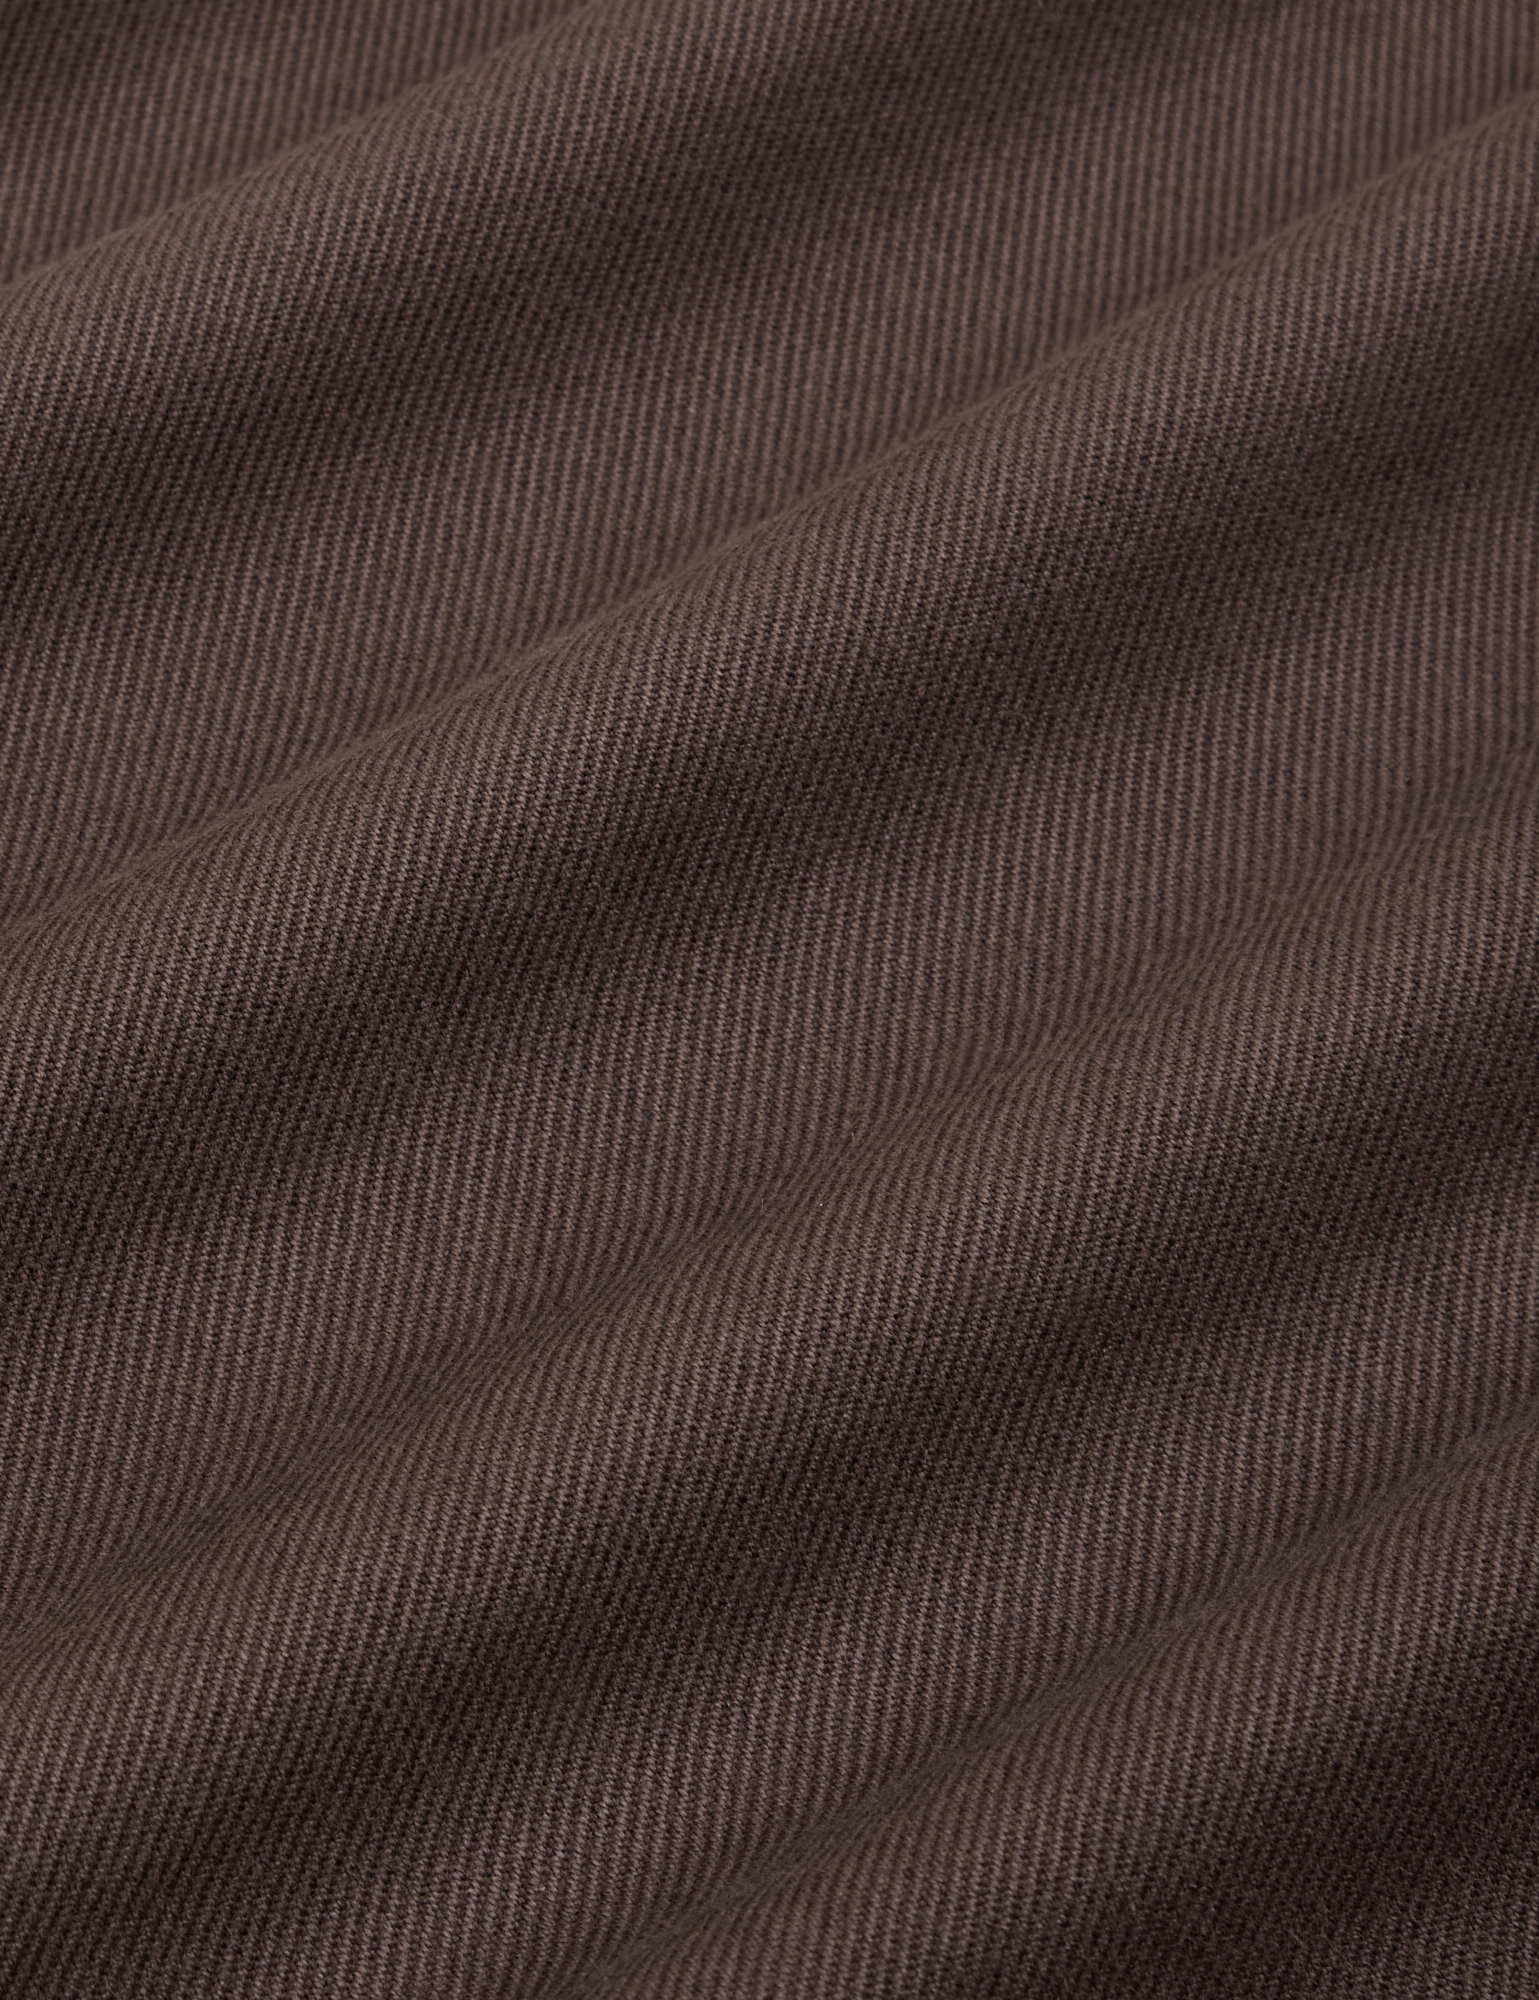 Flannel Overshirt in Espresso Brown fabric detail close up